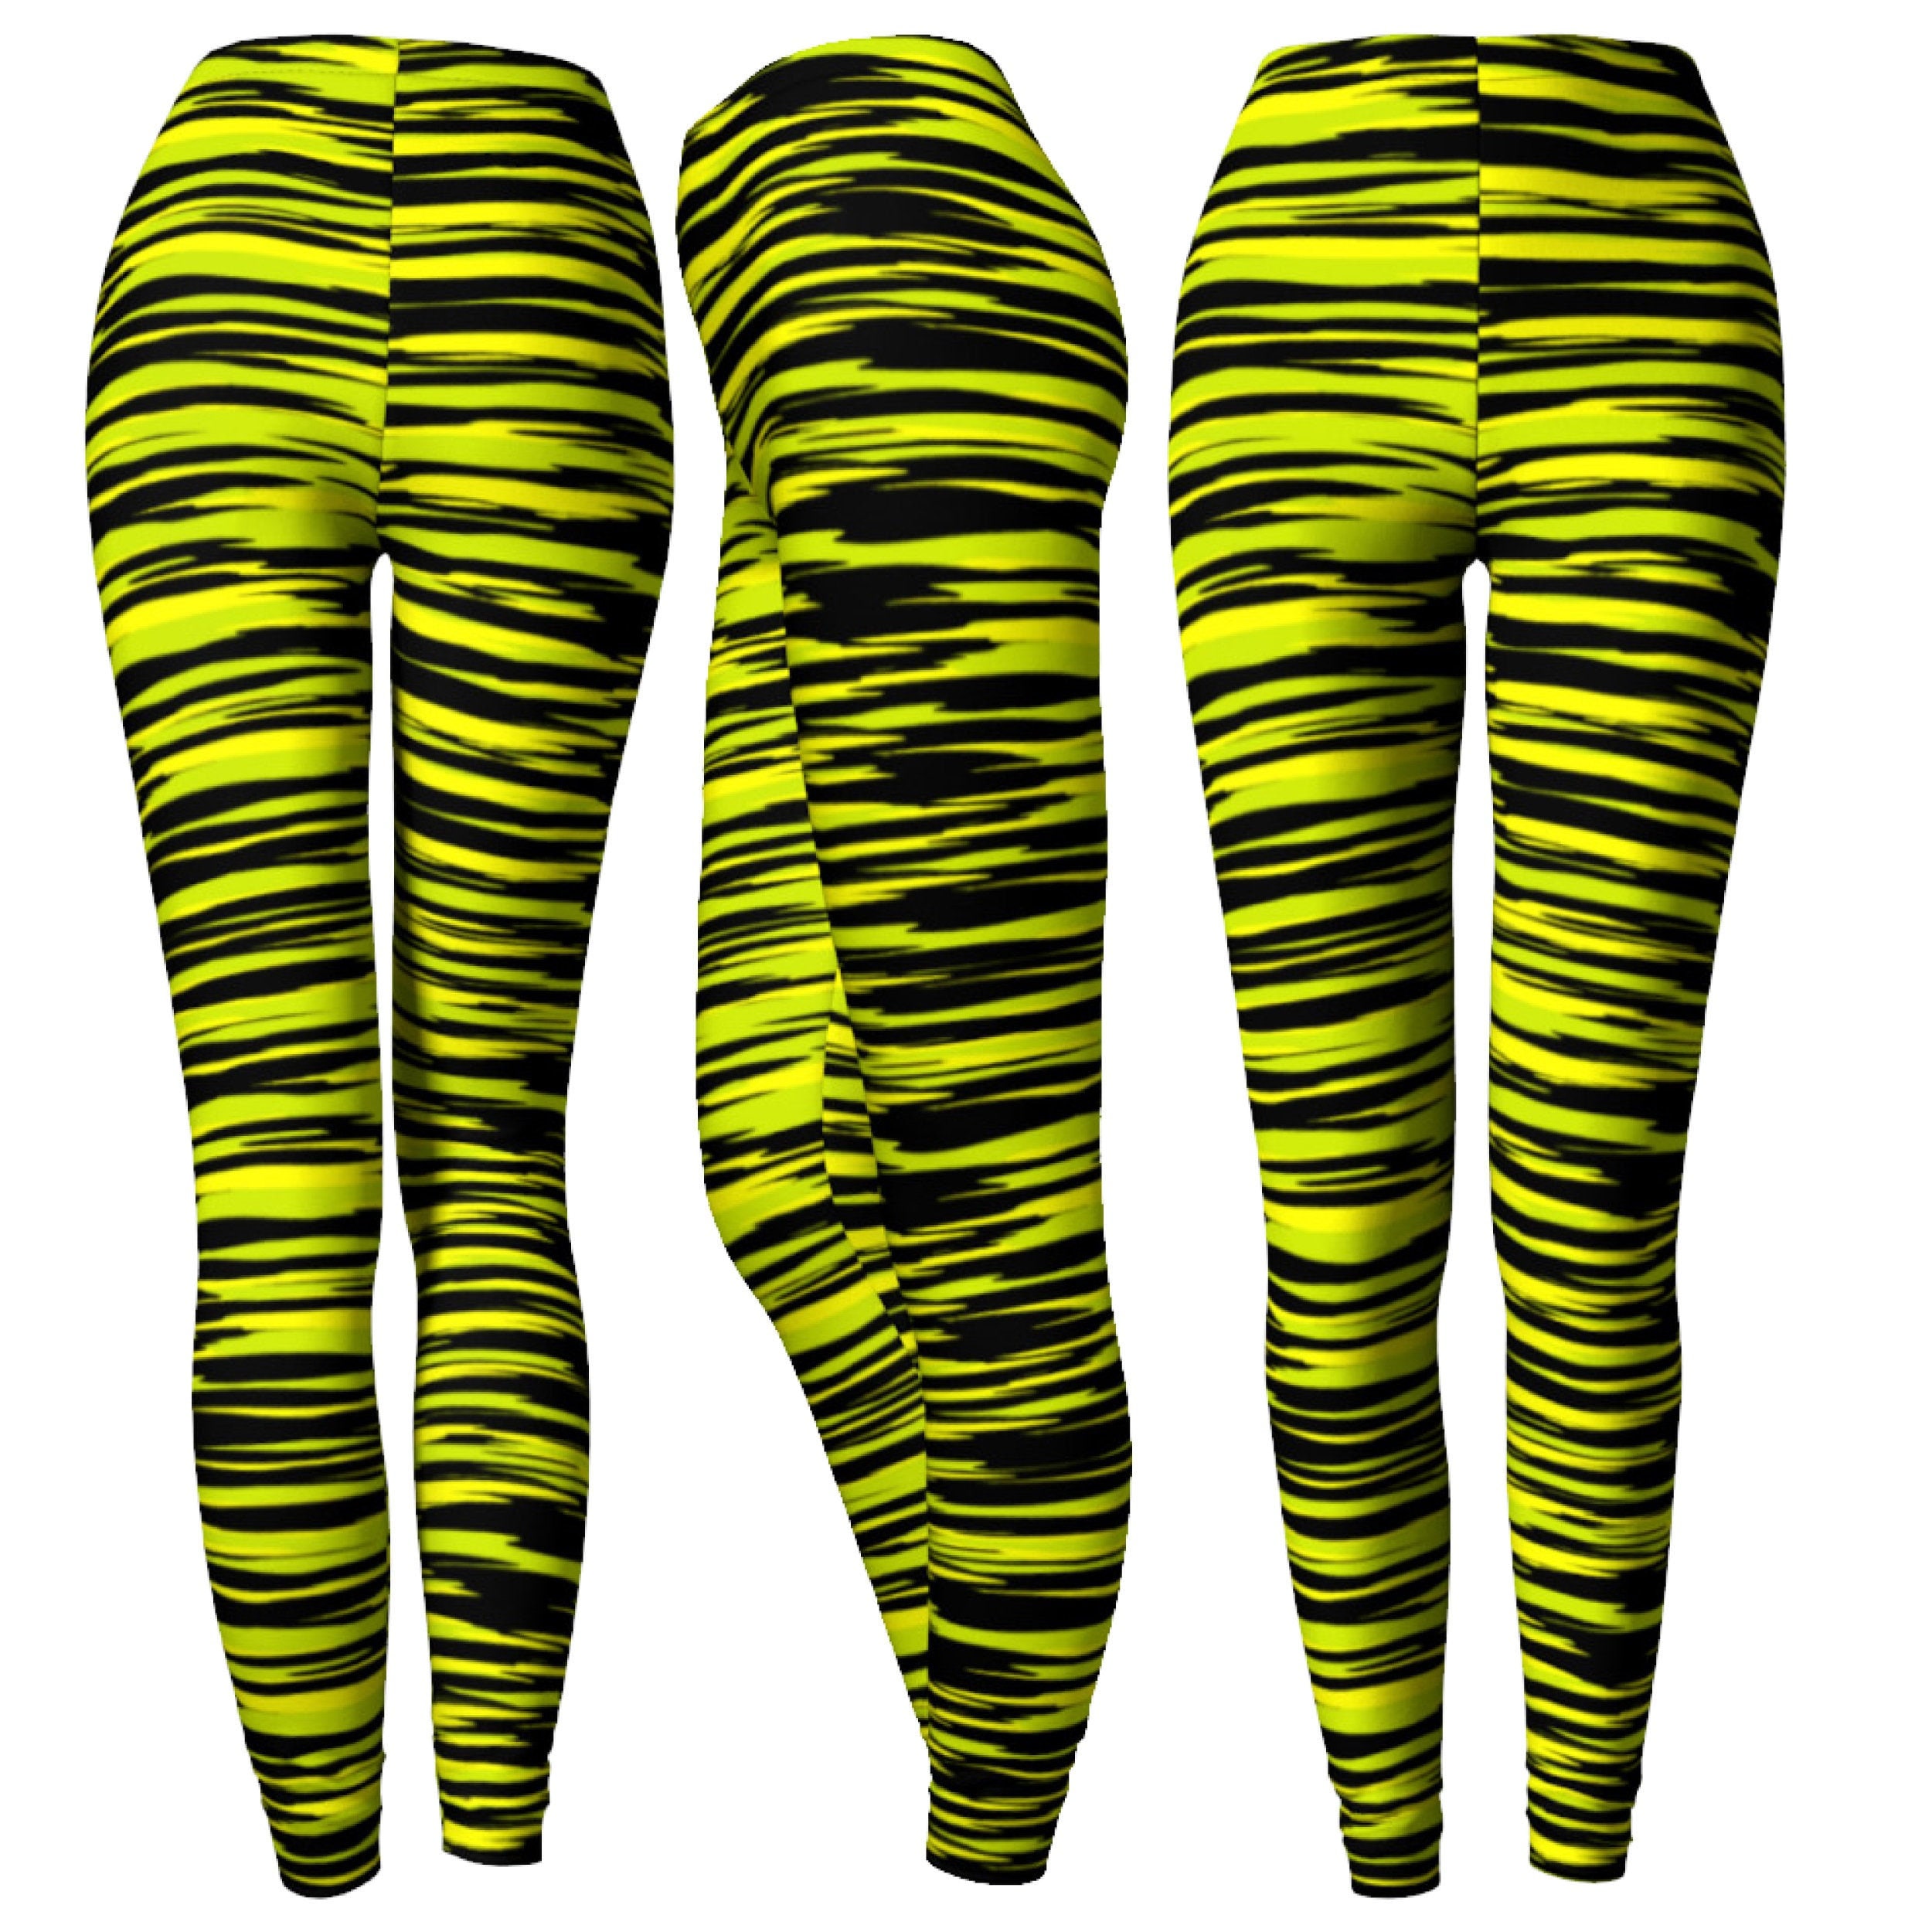 Black and Yellow LEGGINGS Bumble Bee Striped Leggings Womens Yoga Leggings  WOMENS Yoga Pants Camouflage Leggings Workout Leggings Fitness